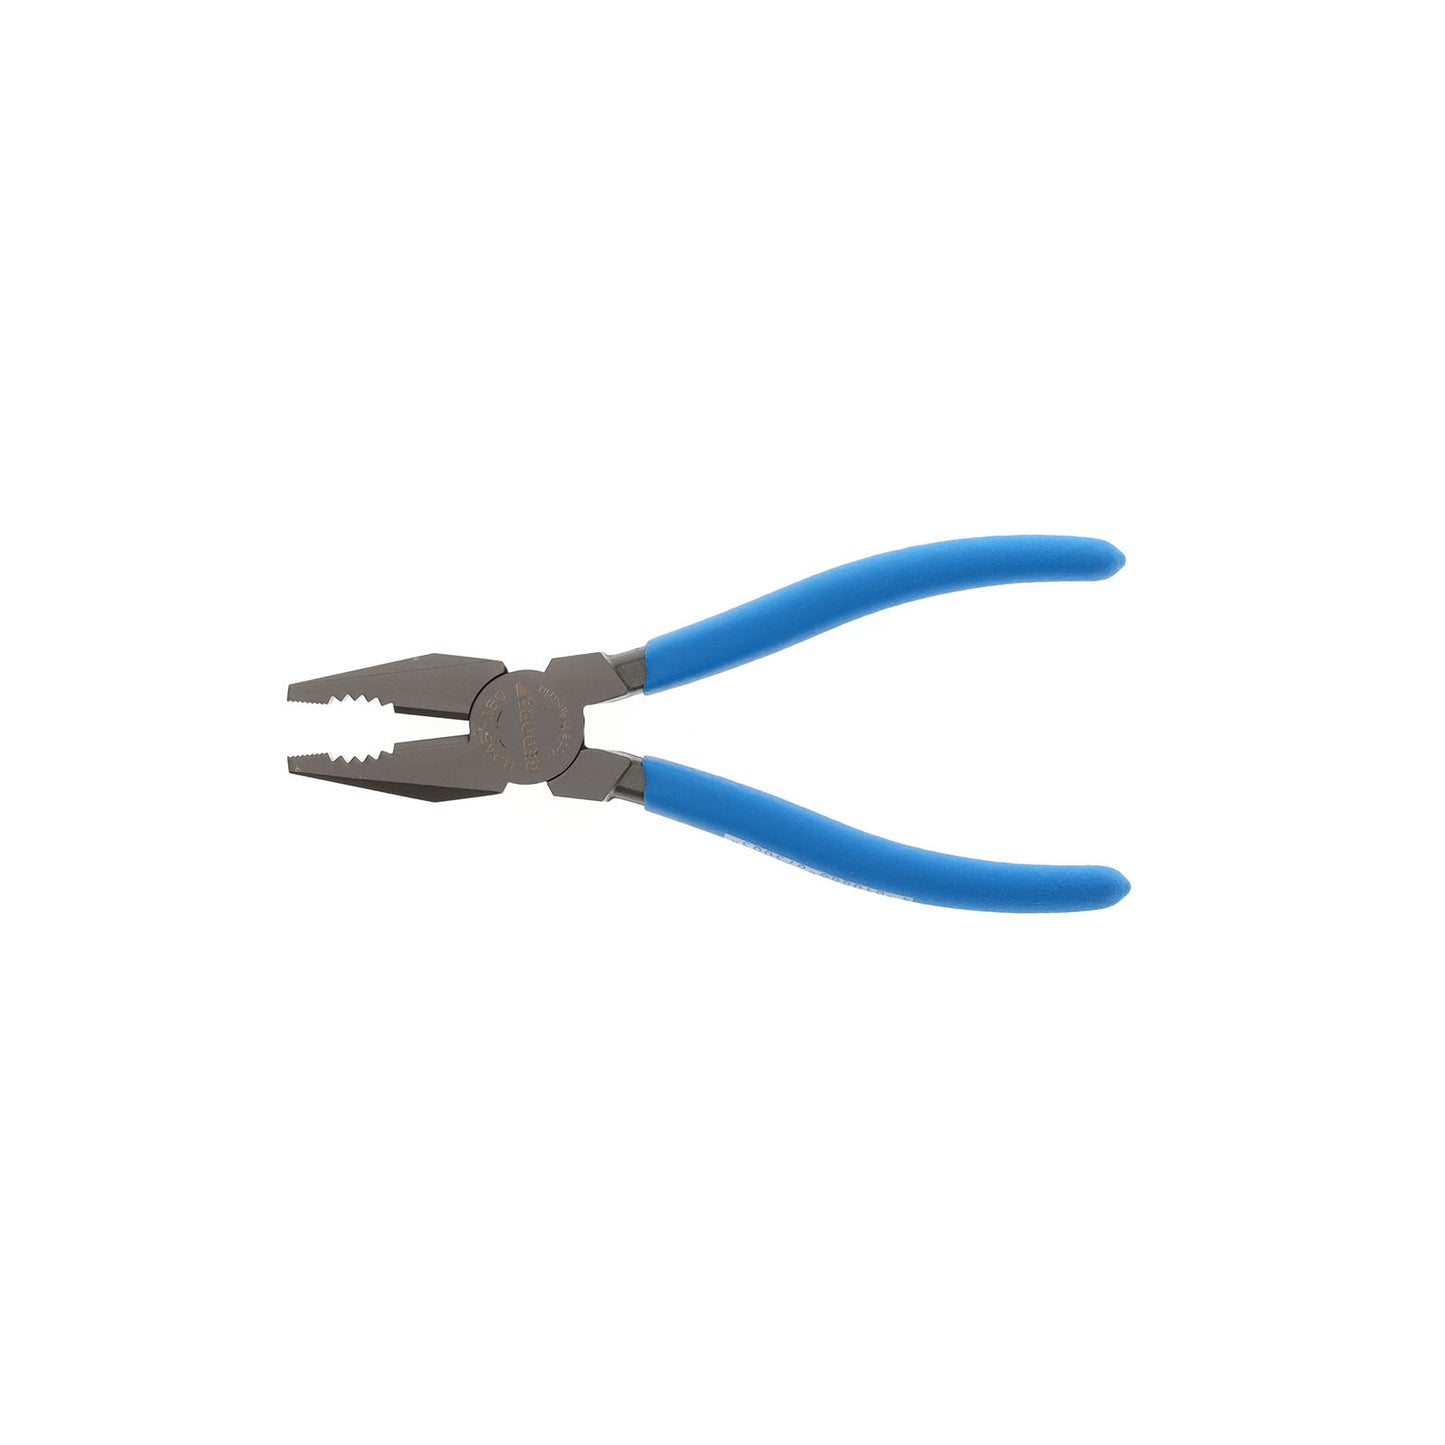 GEDORE 8245-160 TL - Universal pliers 160 mm (6730050)